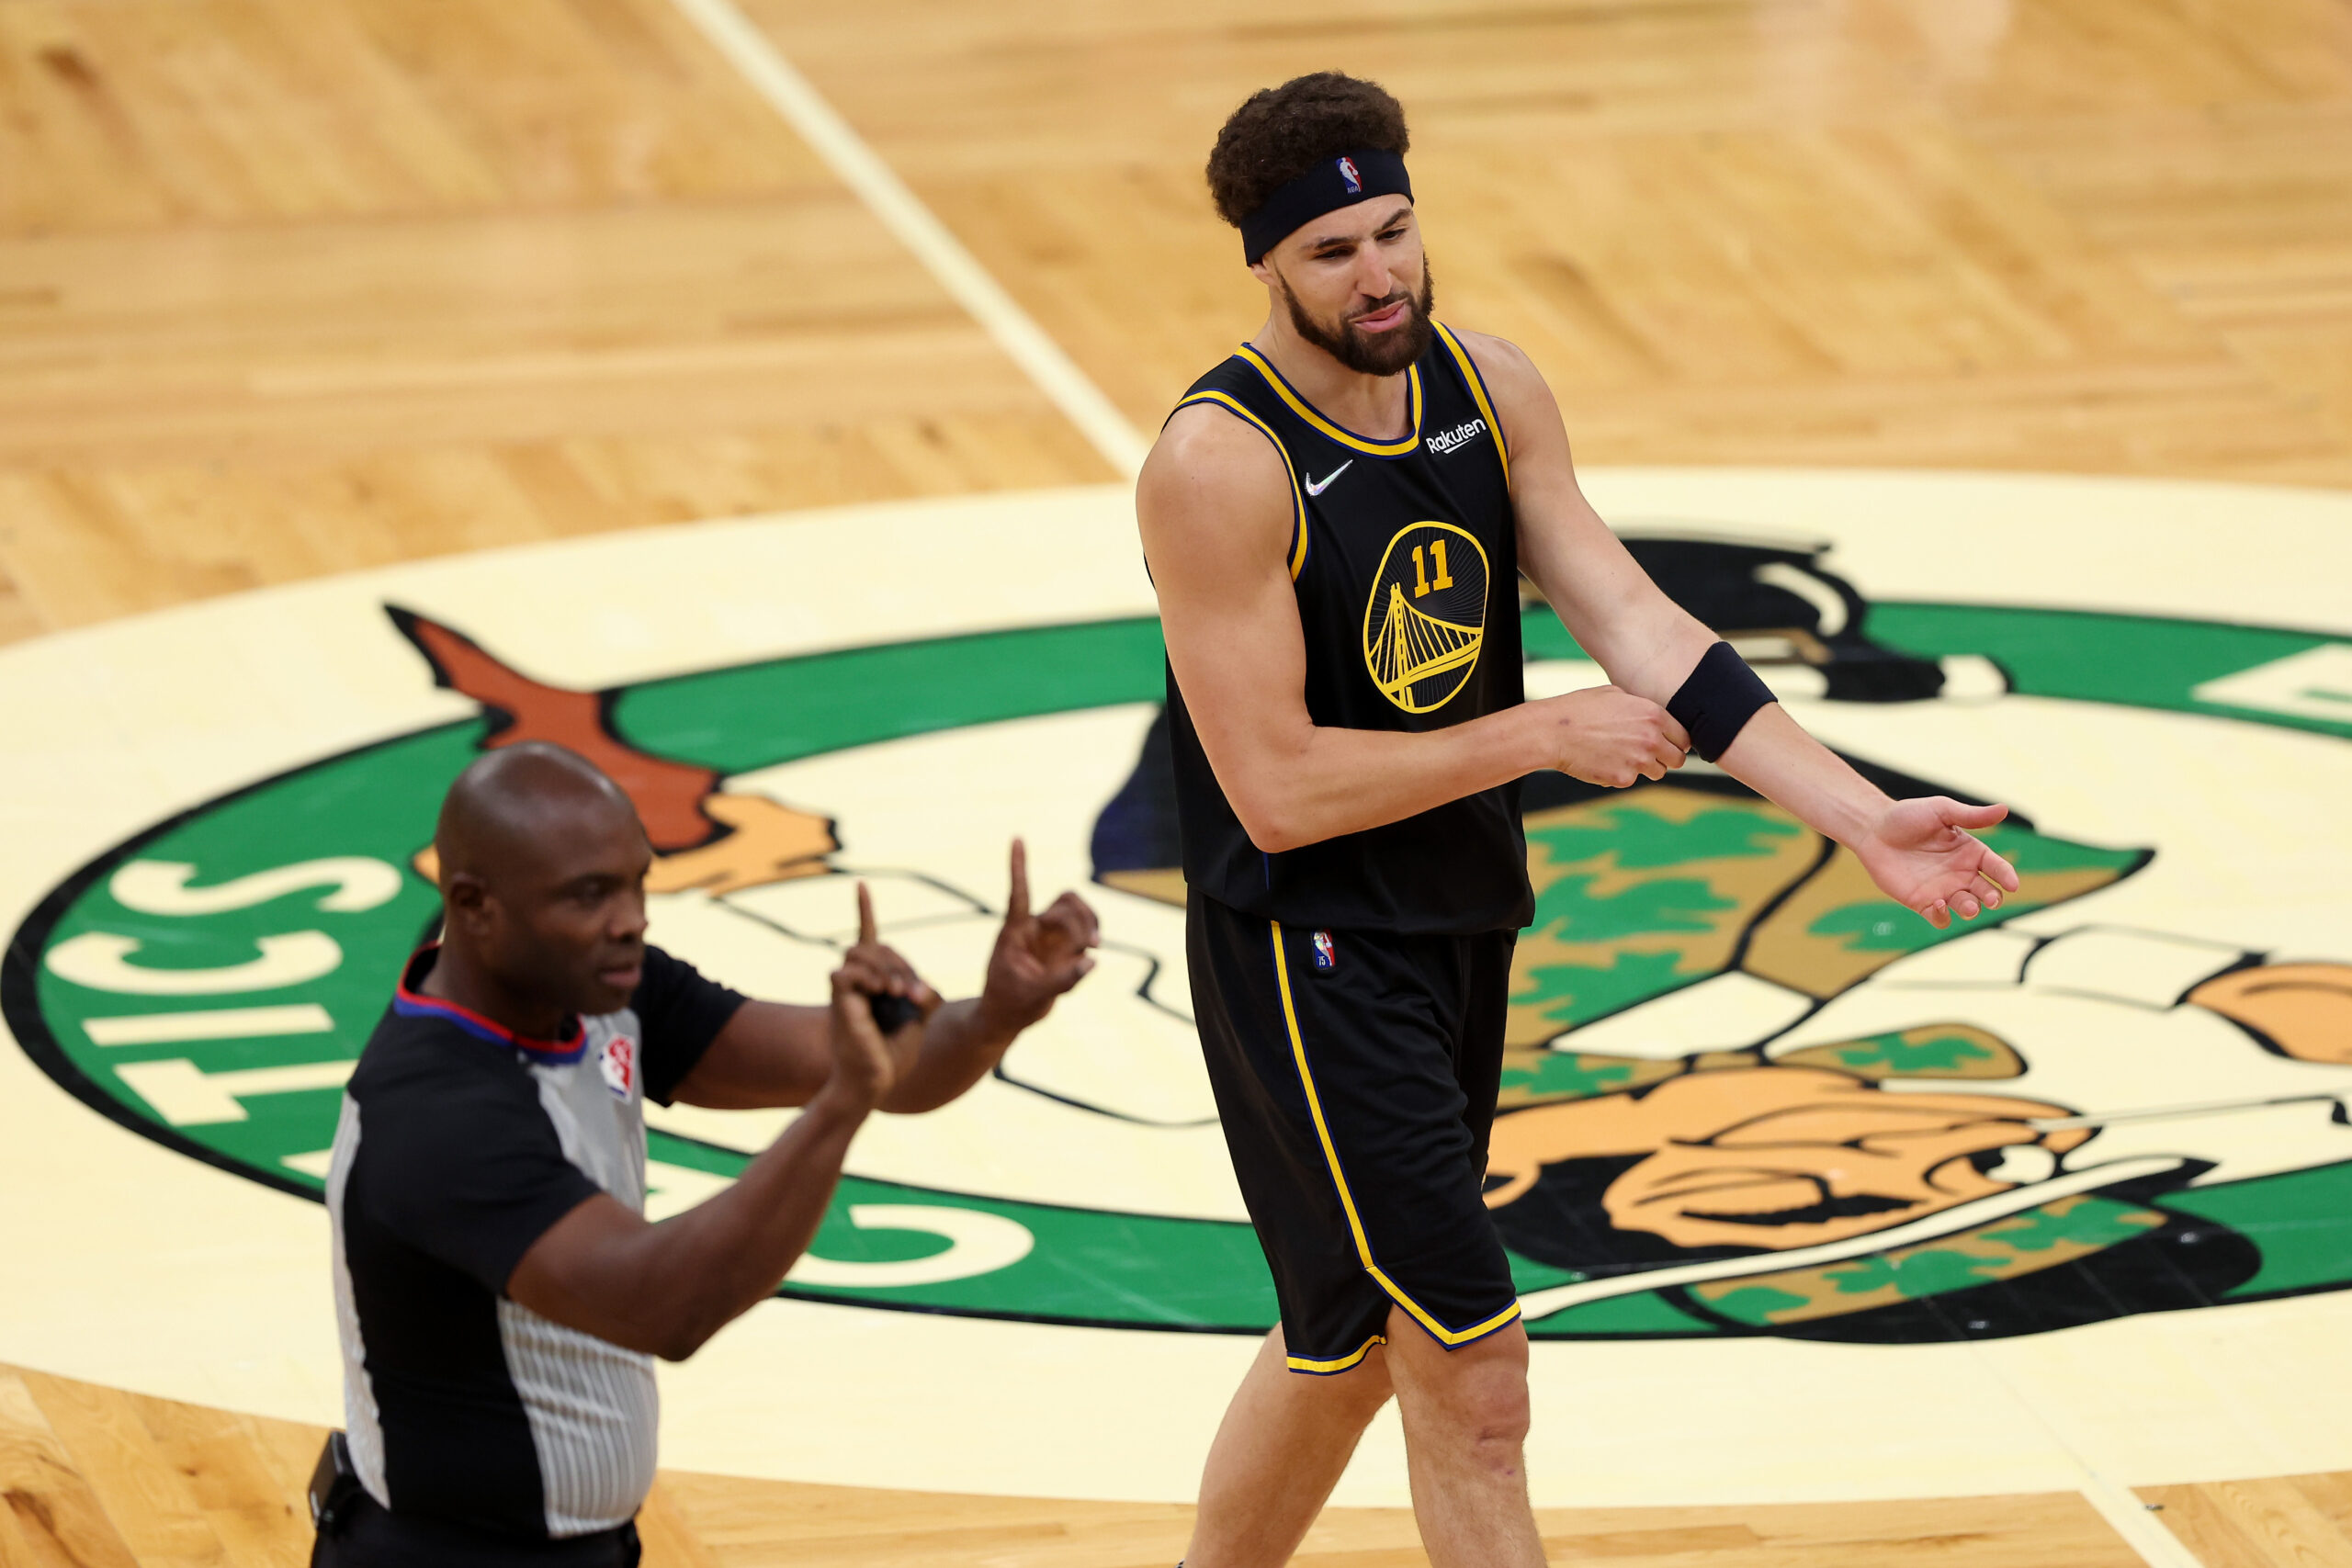 Klay Thompson Criticizes Boston Crowd After Game 3 (Video